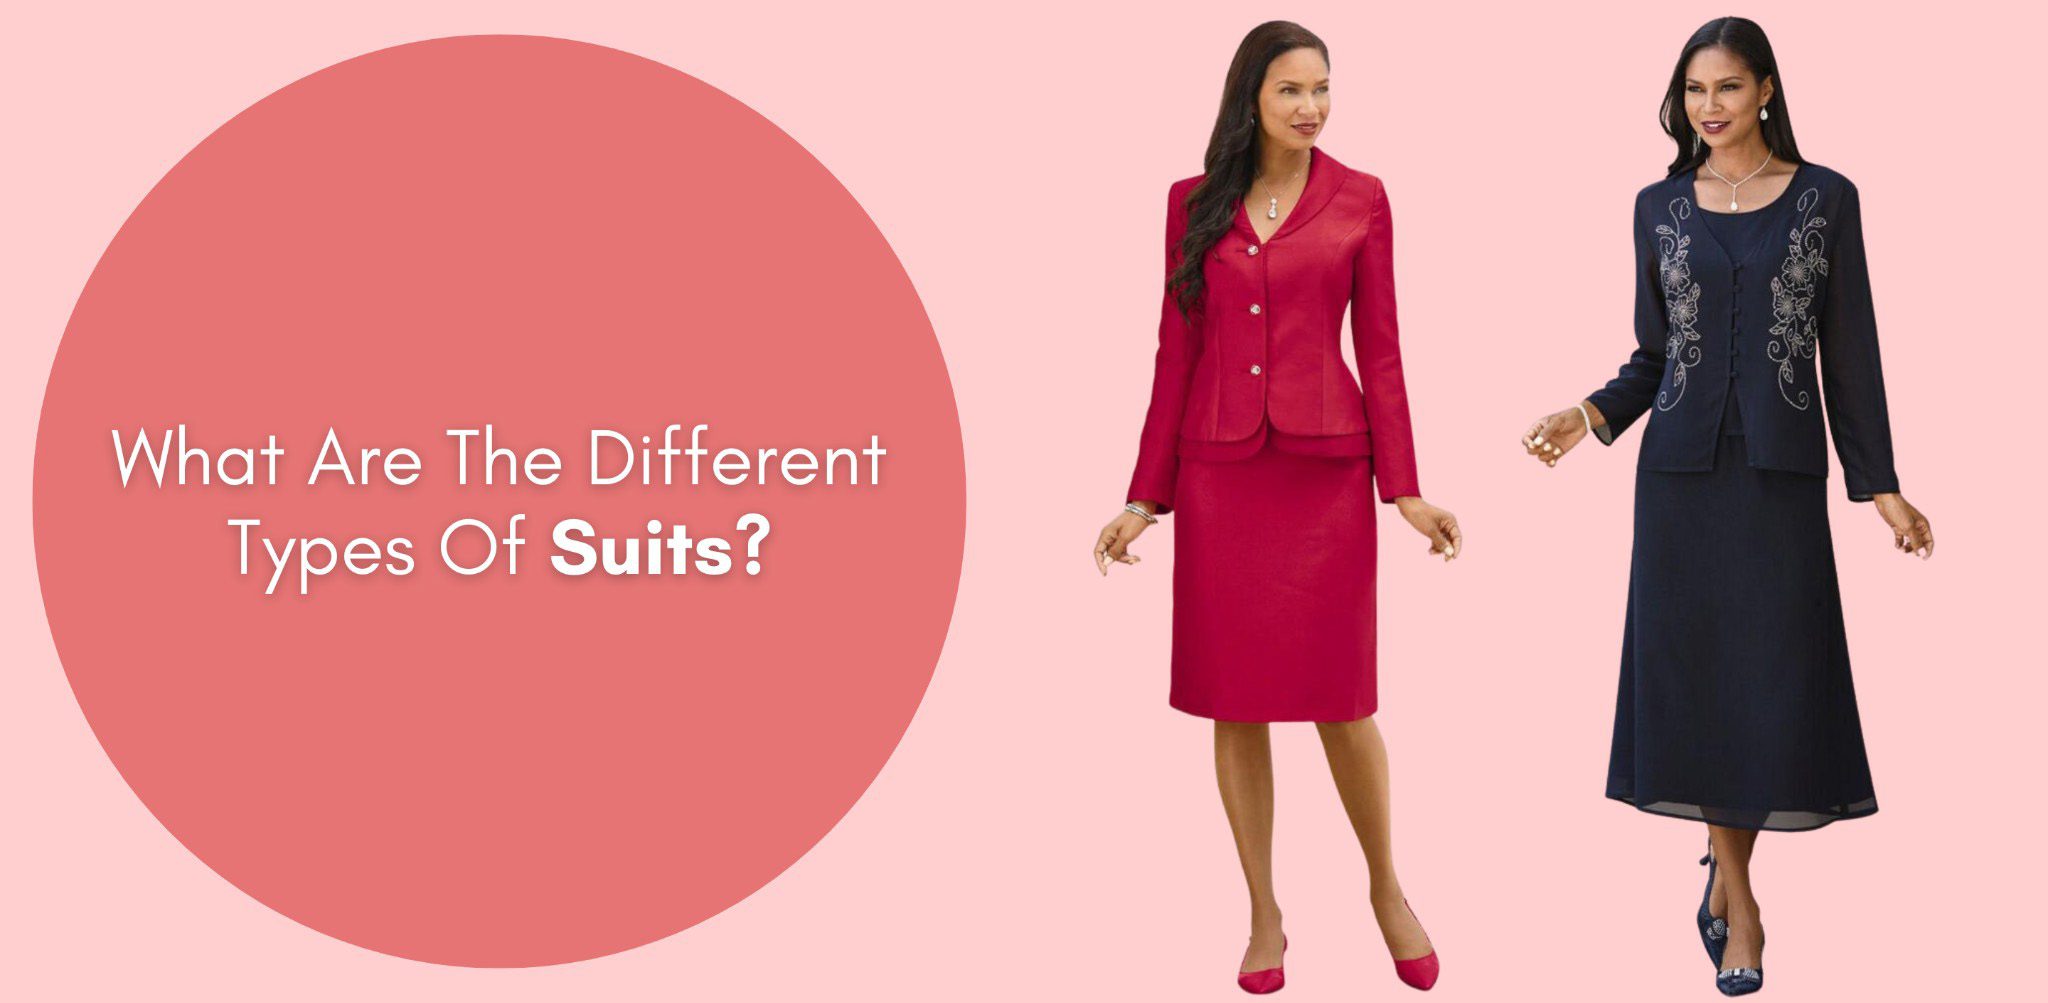 What Are The Different Types Of Suits?